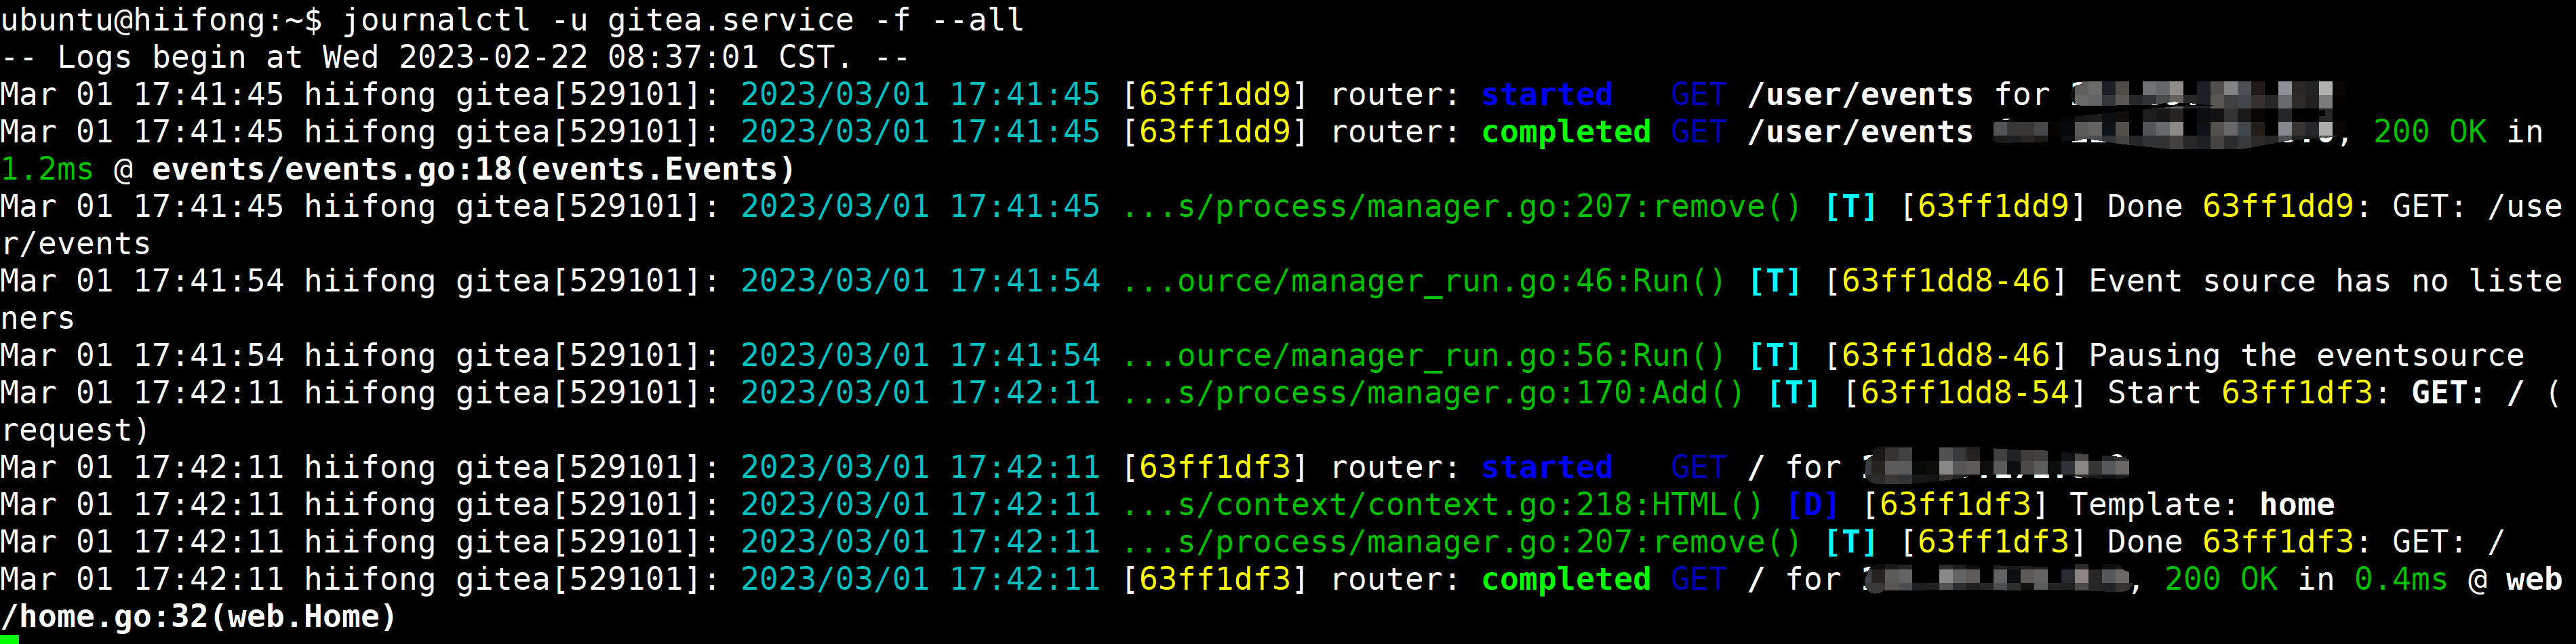 Journalctl output color log(`journalctl` 怎么输出彩色日志)